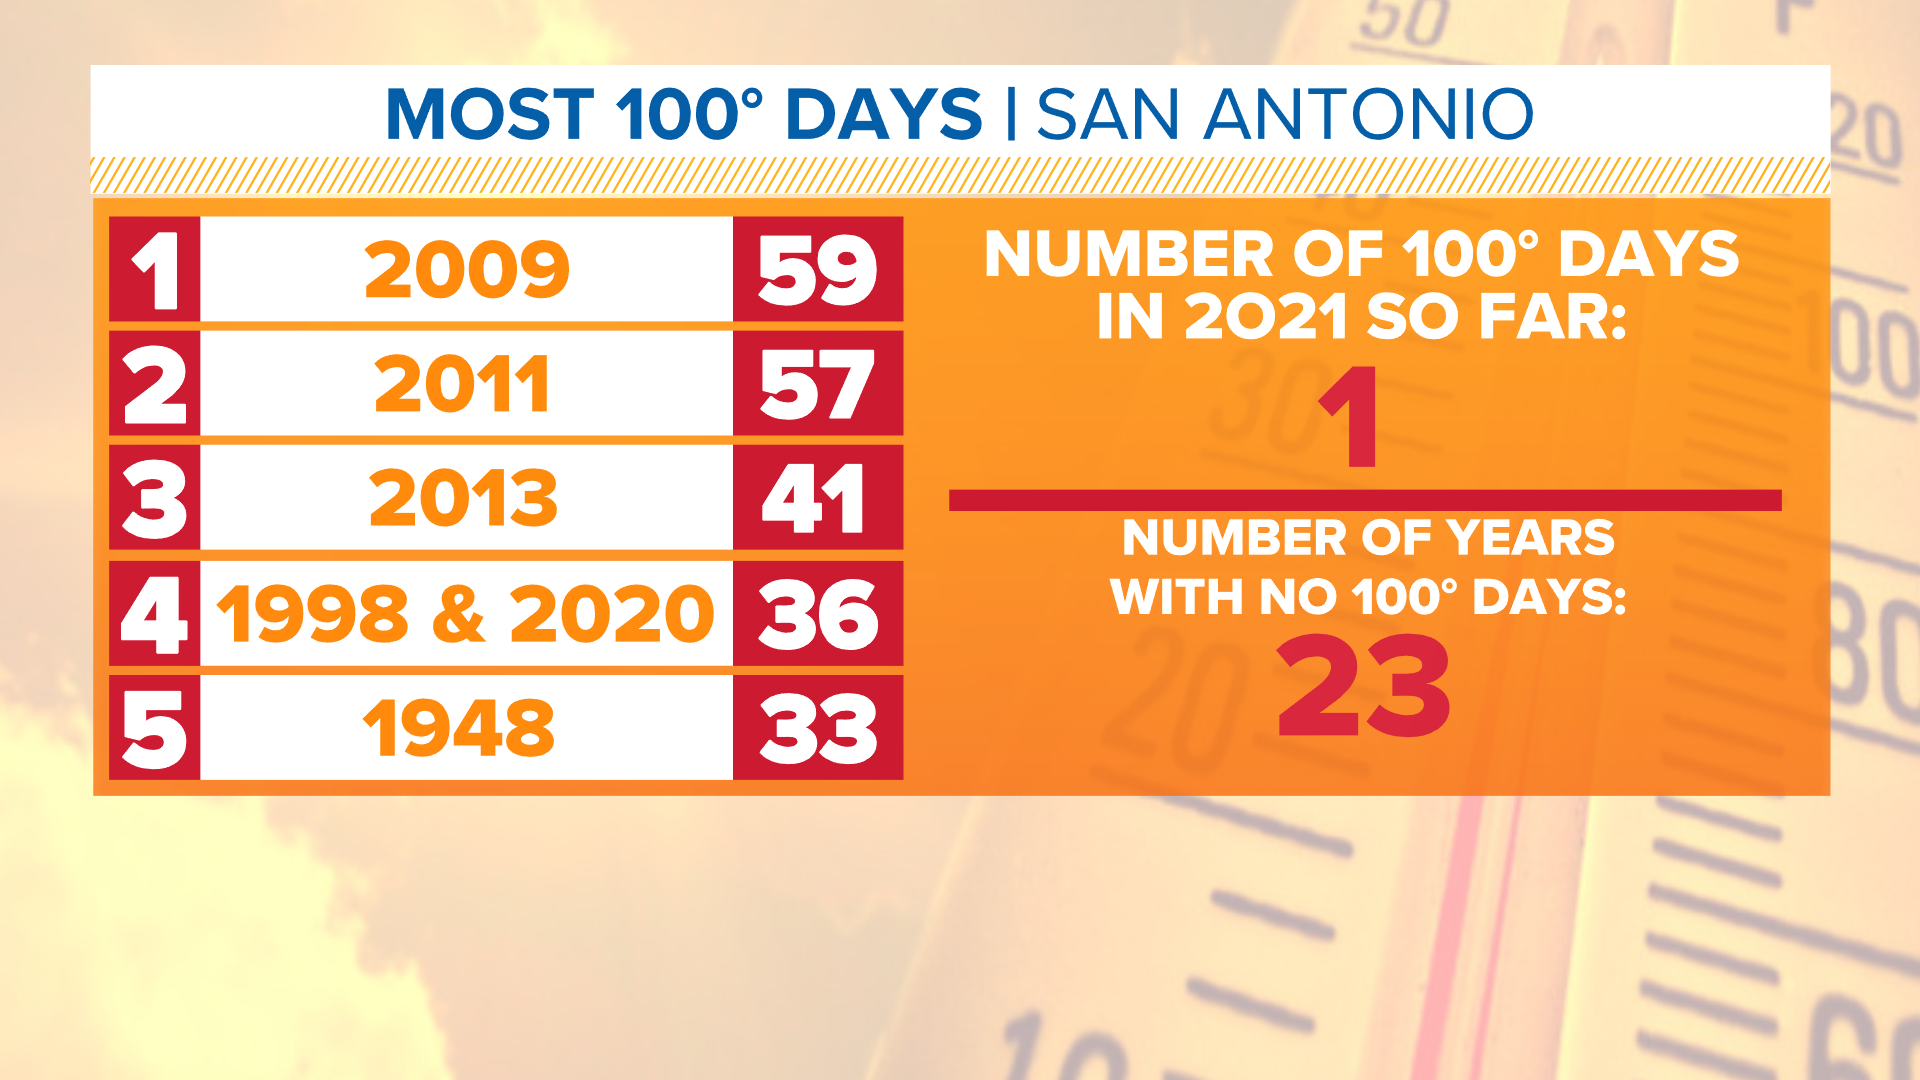 San Antonio sets new record with arrival of first 100degree day of